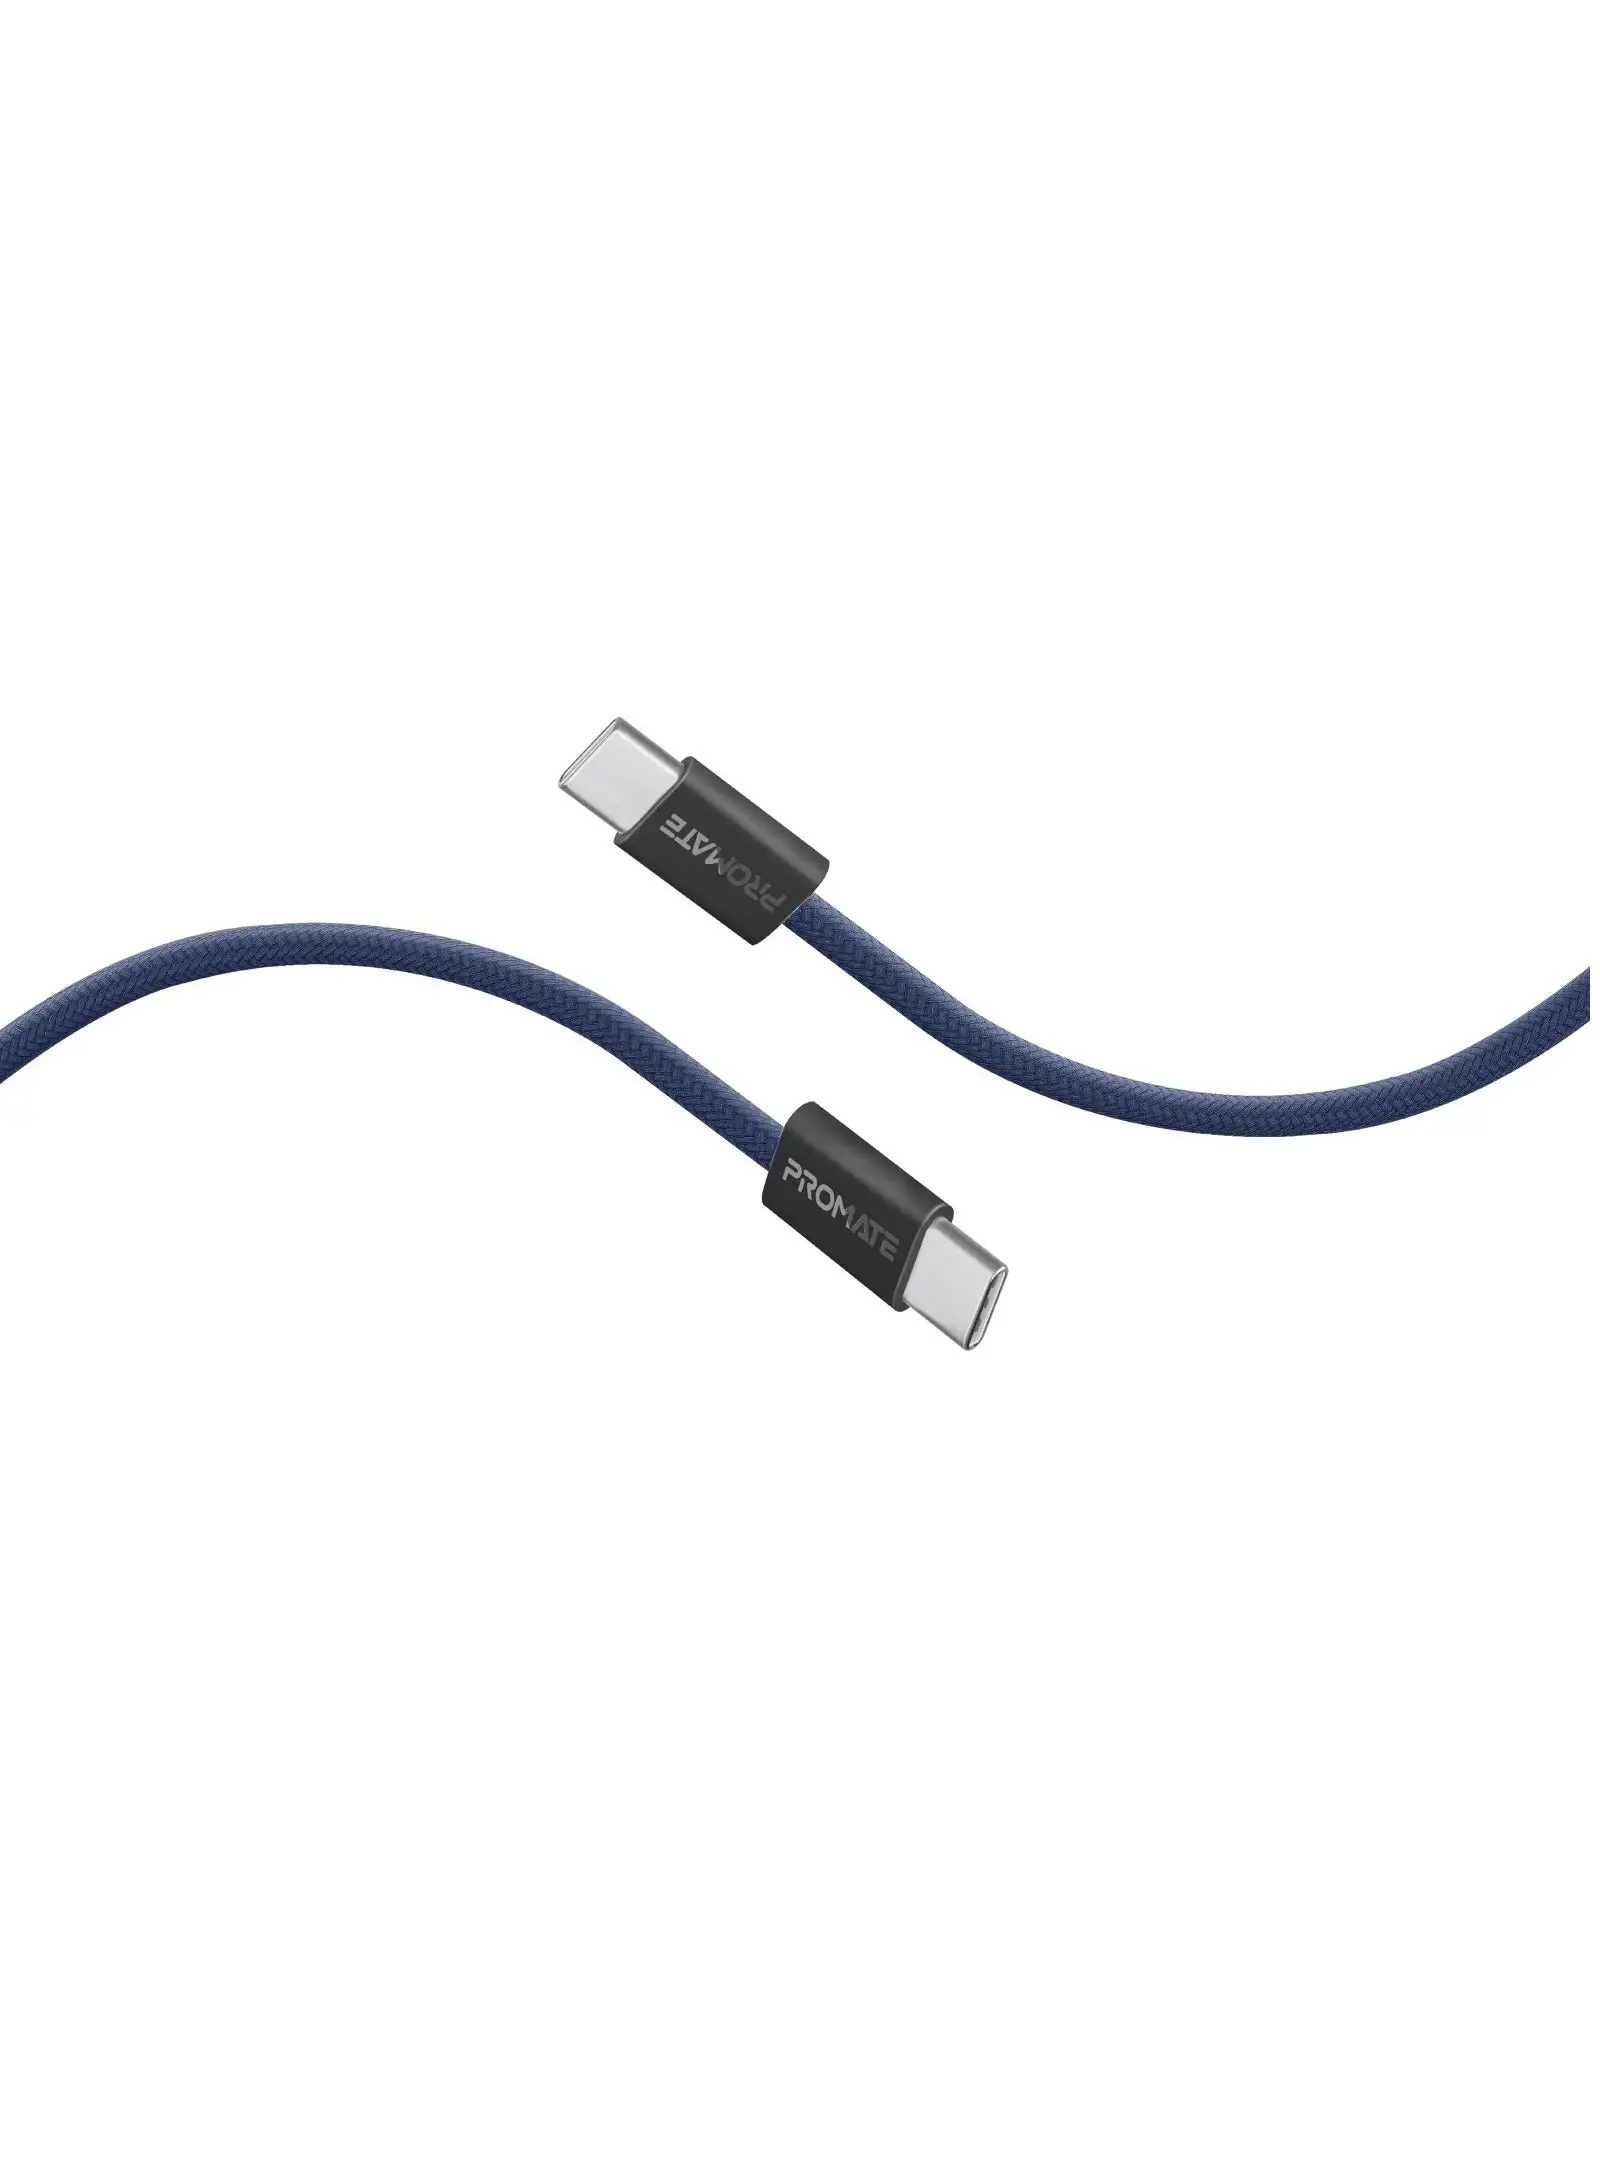 PROMATE USB-C Charging Cable, Powerful Sync Charge Type-C Cable with 60W Fast Power Delivery, 480Mbps Data Transfer and 200cm Tangle-Free Nylon Braided Cord, EcoLine-CC200 Blue